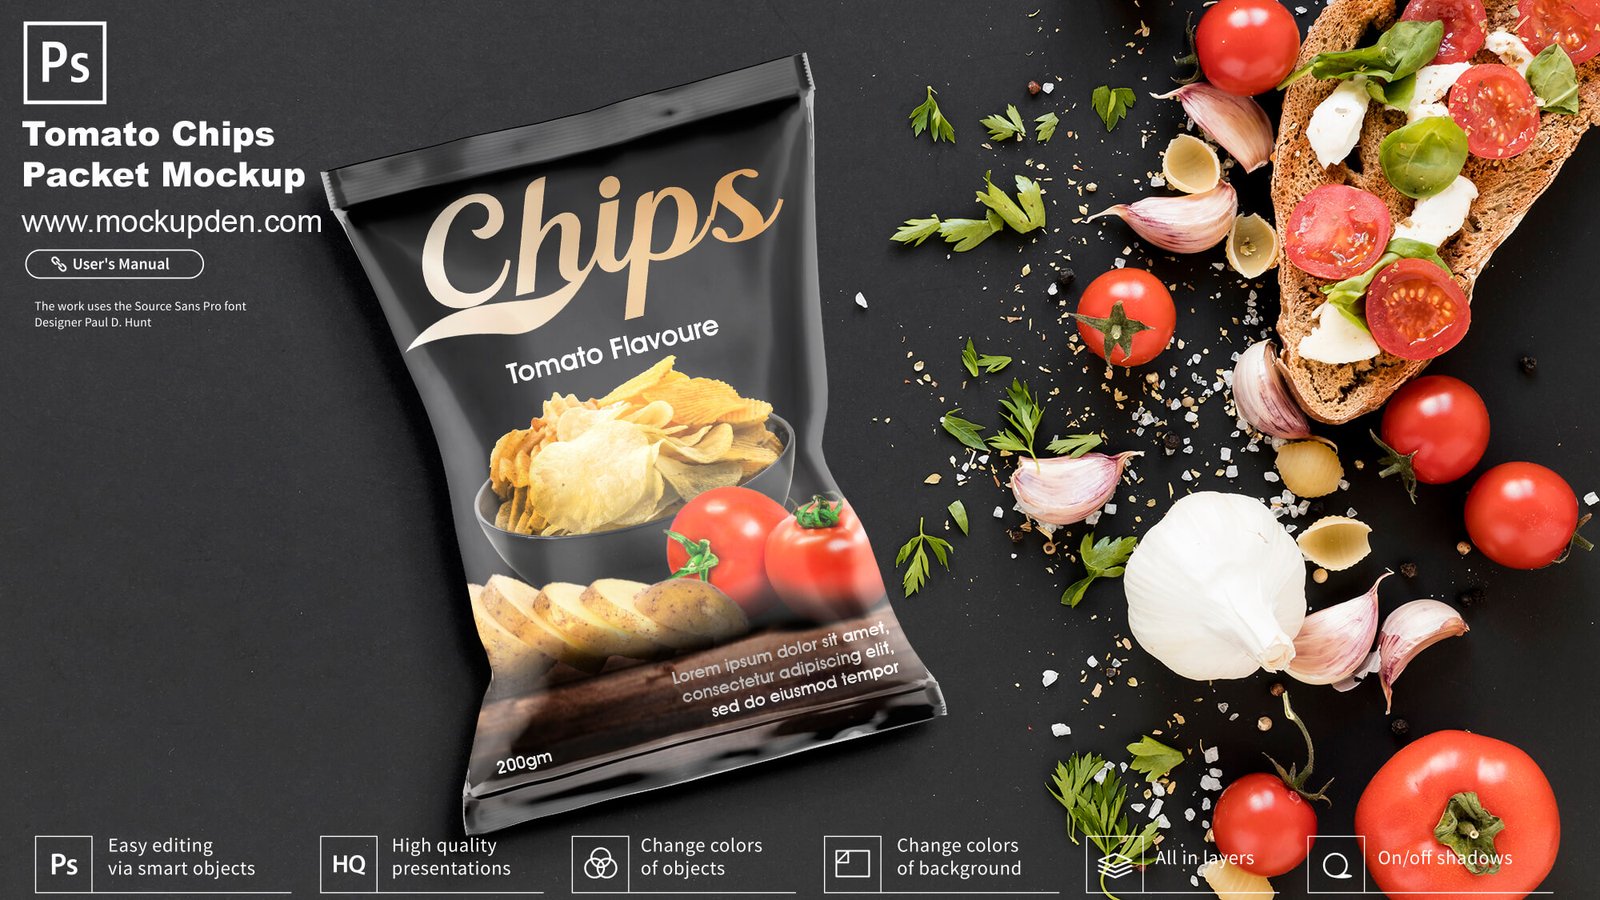 Free Tomato Chips Packet Mockup PSD Template